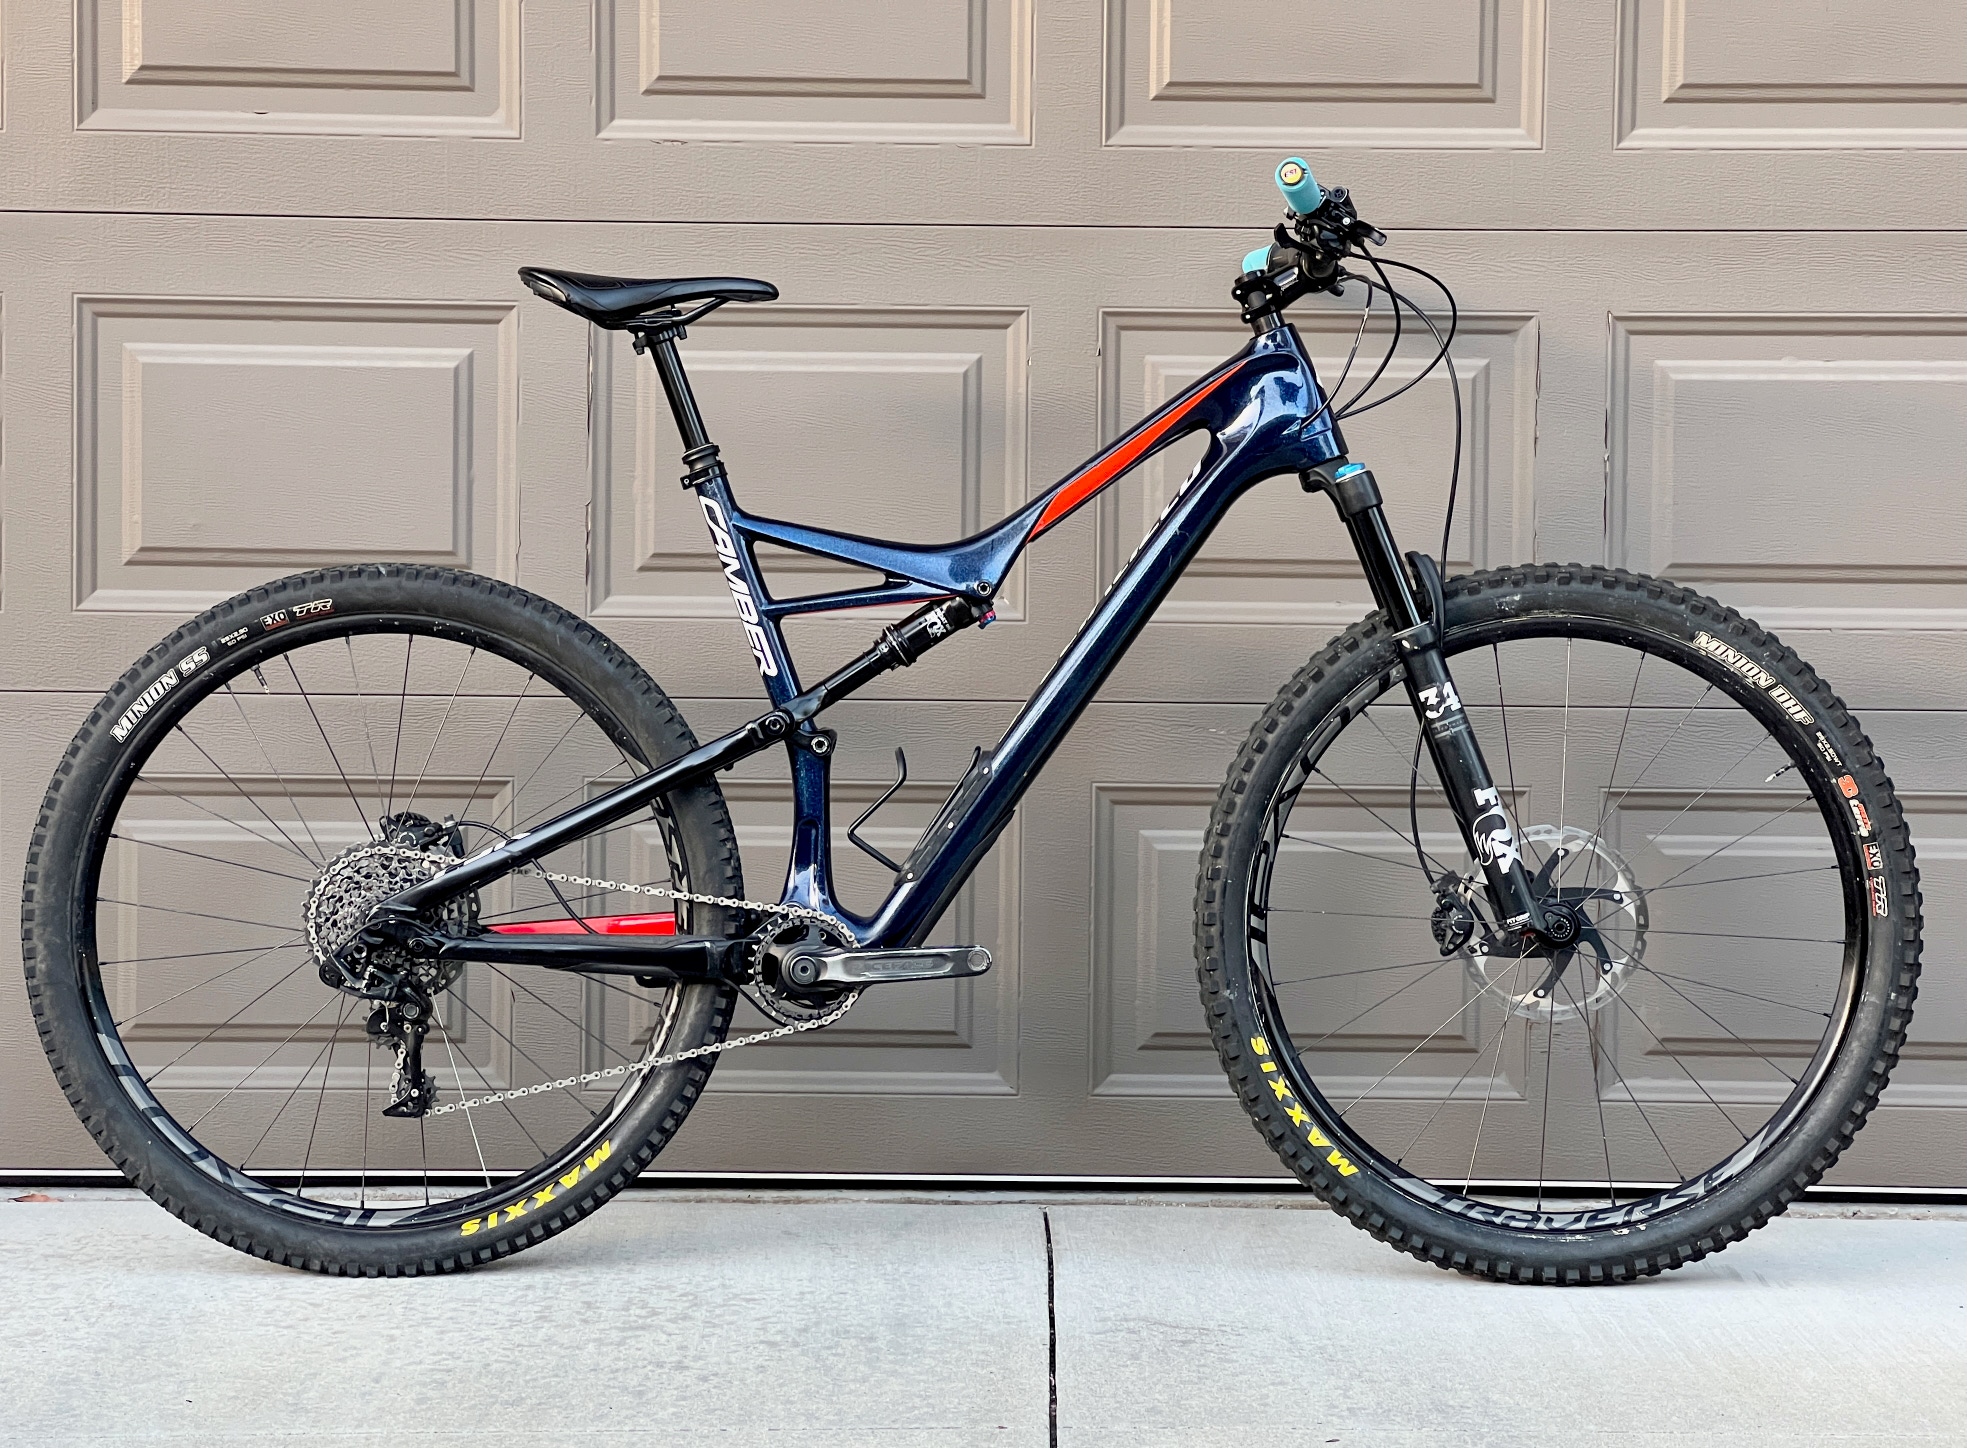 2017 Specialized Camber Expert 29 Carbon XL Full Suspension Trail Mountain Bike